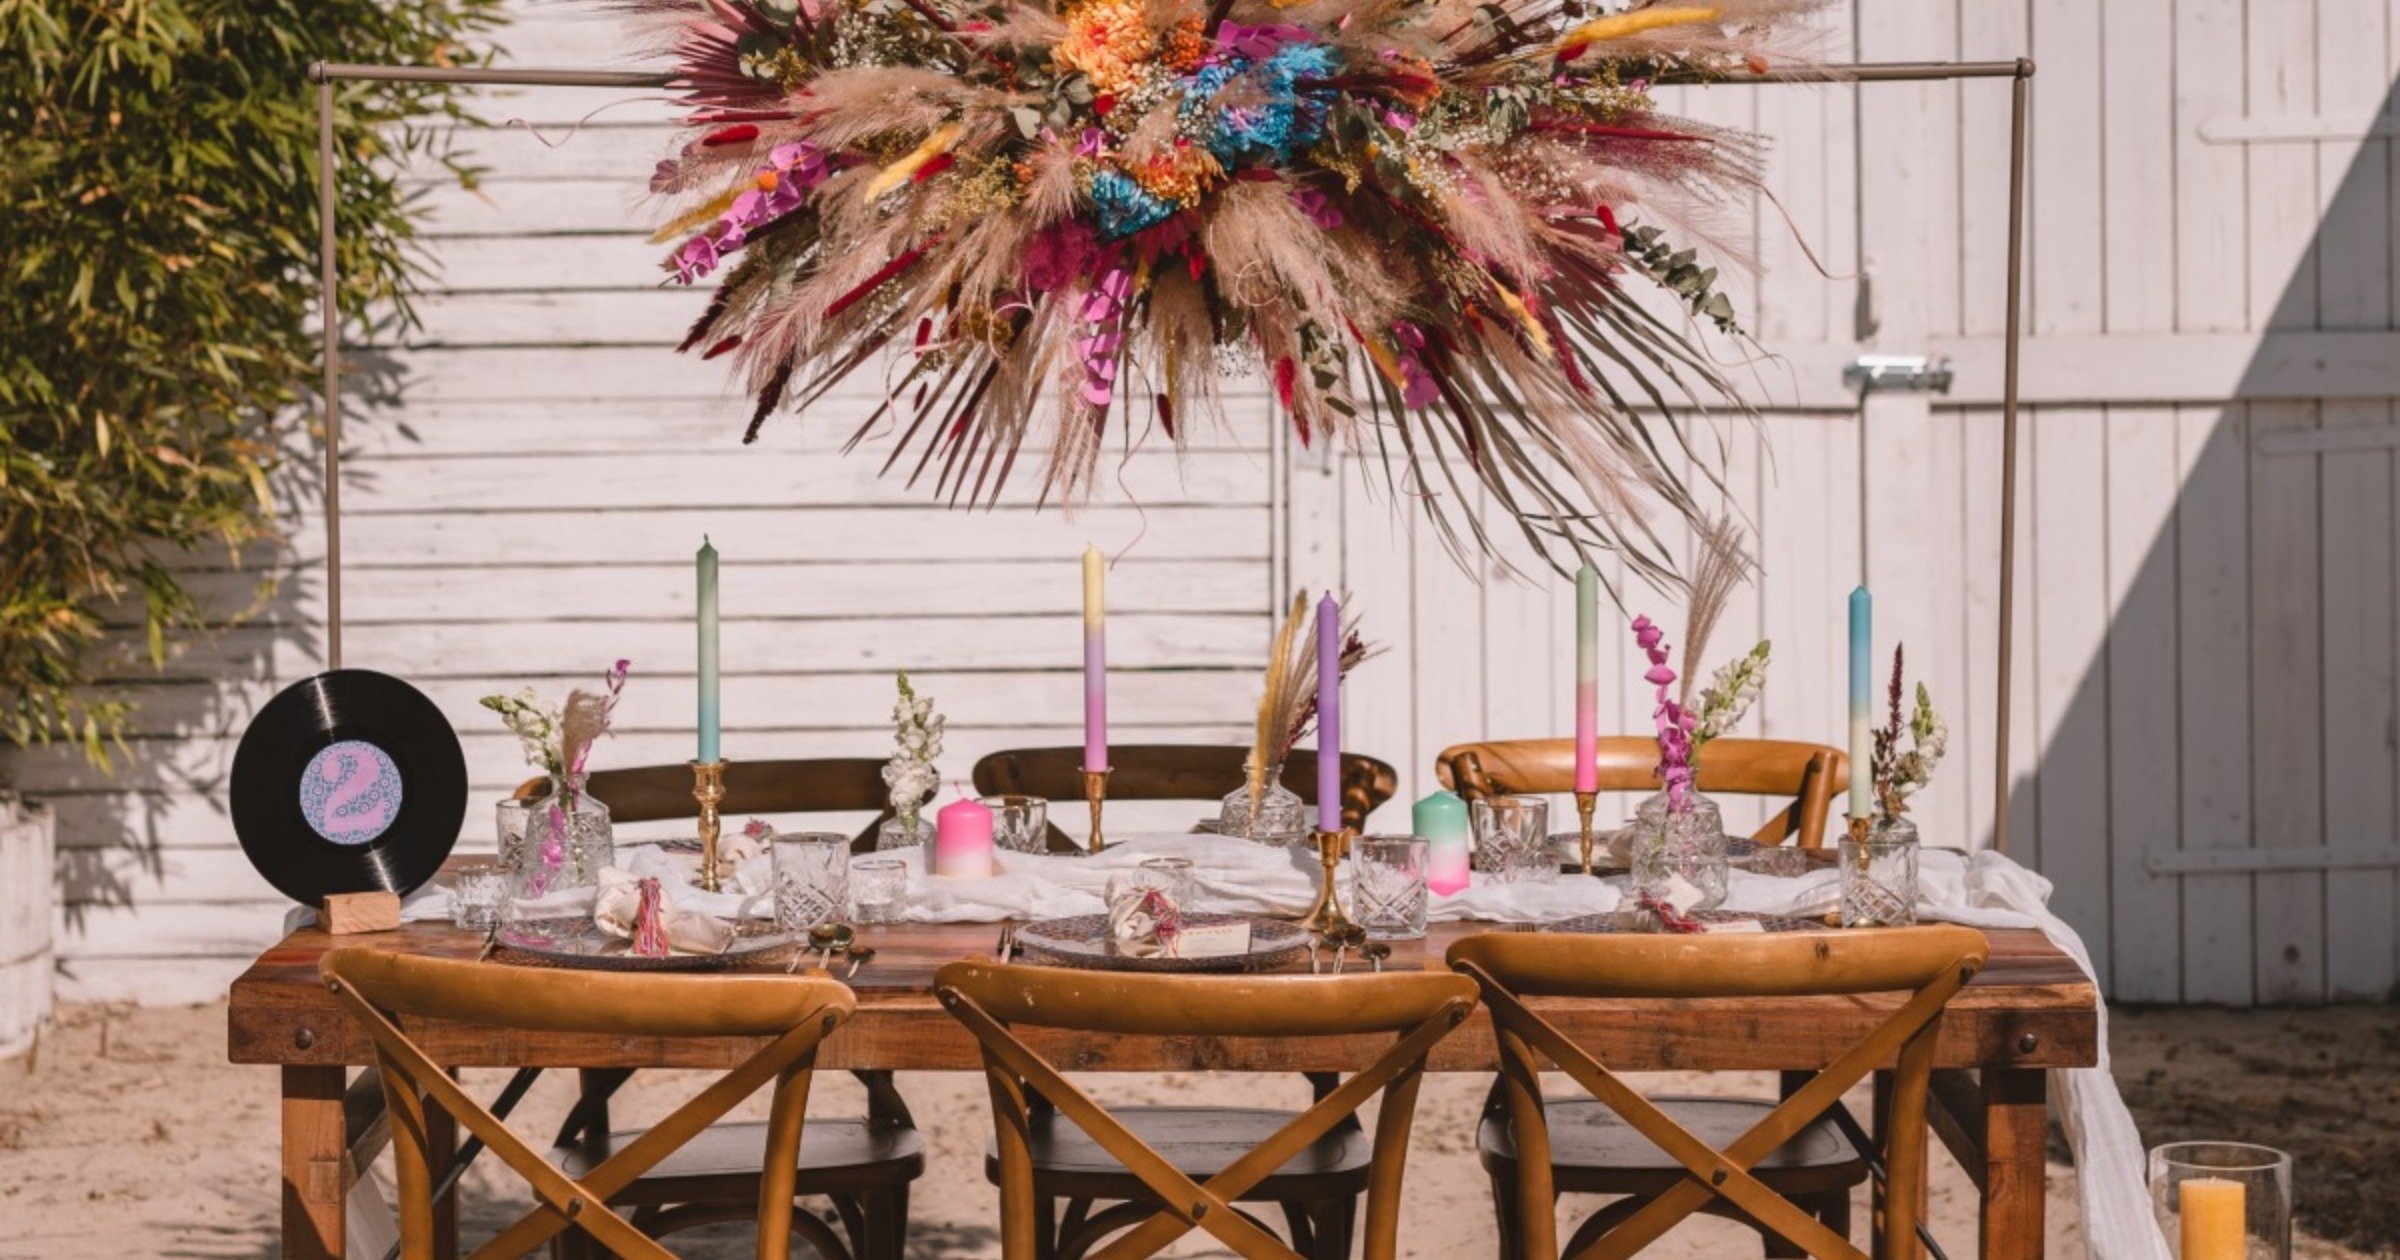 Edgy Meets Ever After at this Beachy Festival Wedding Concept